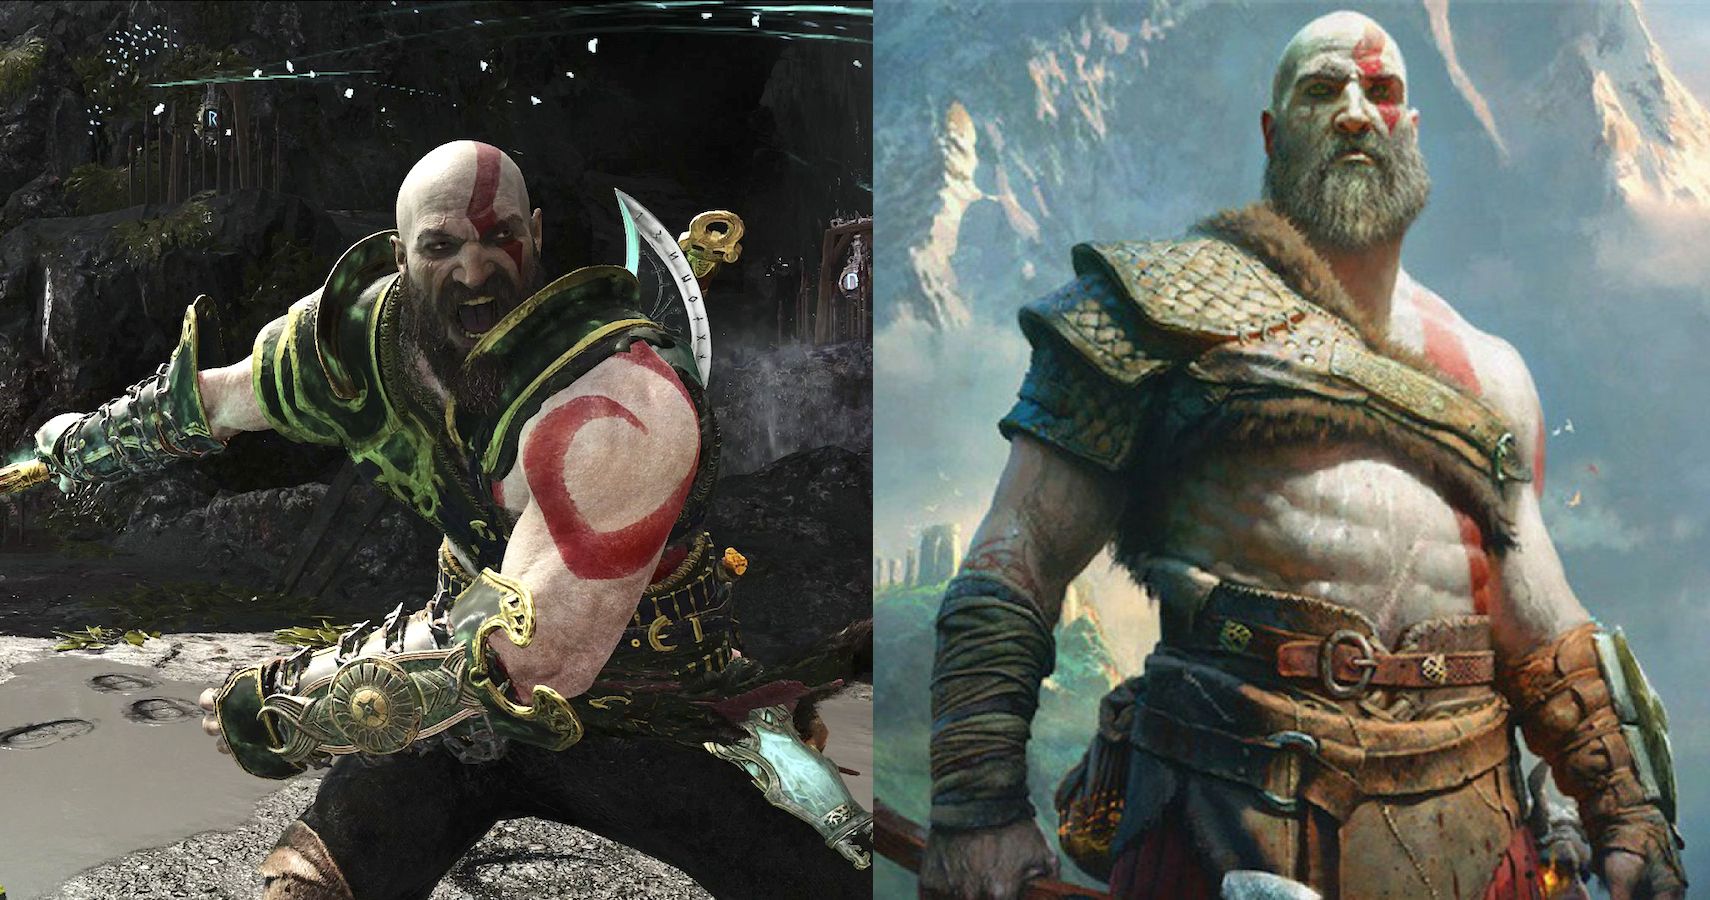 God of War 1 vs. God of War 2 vs. God of War 3 Comparison. Which